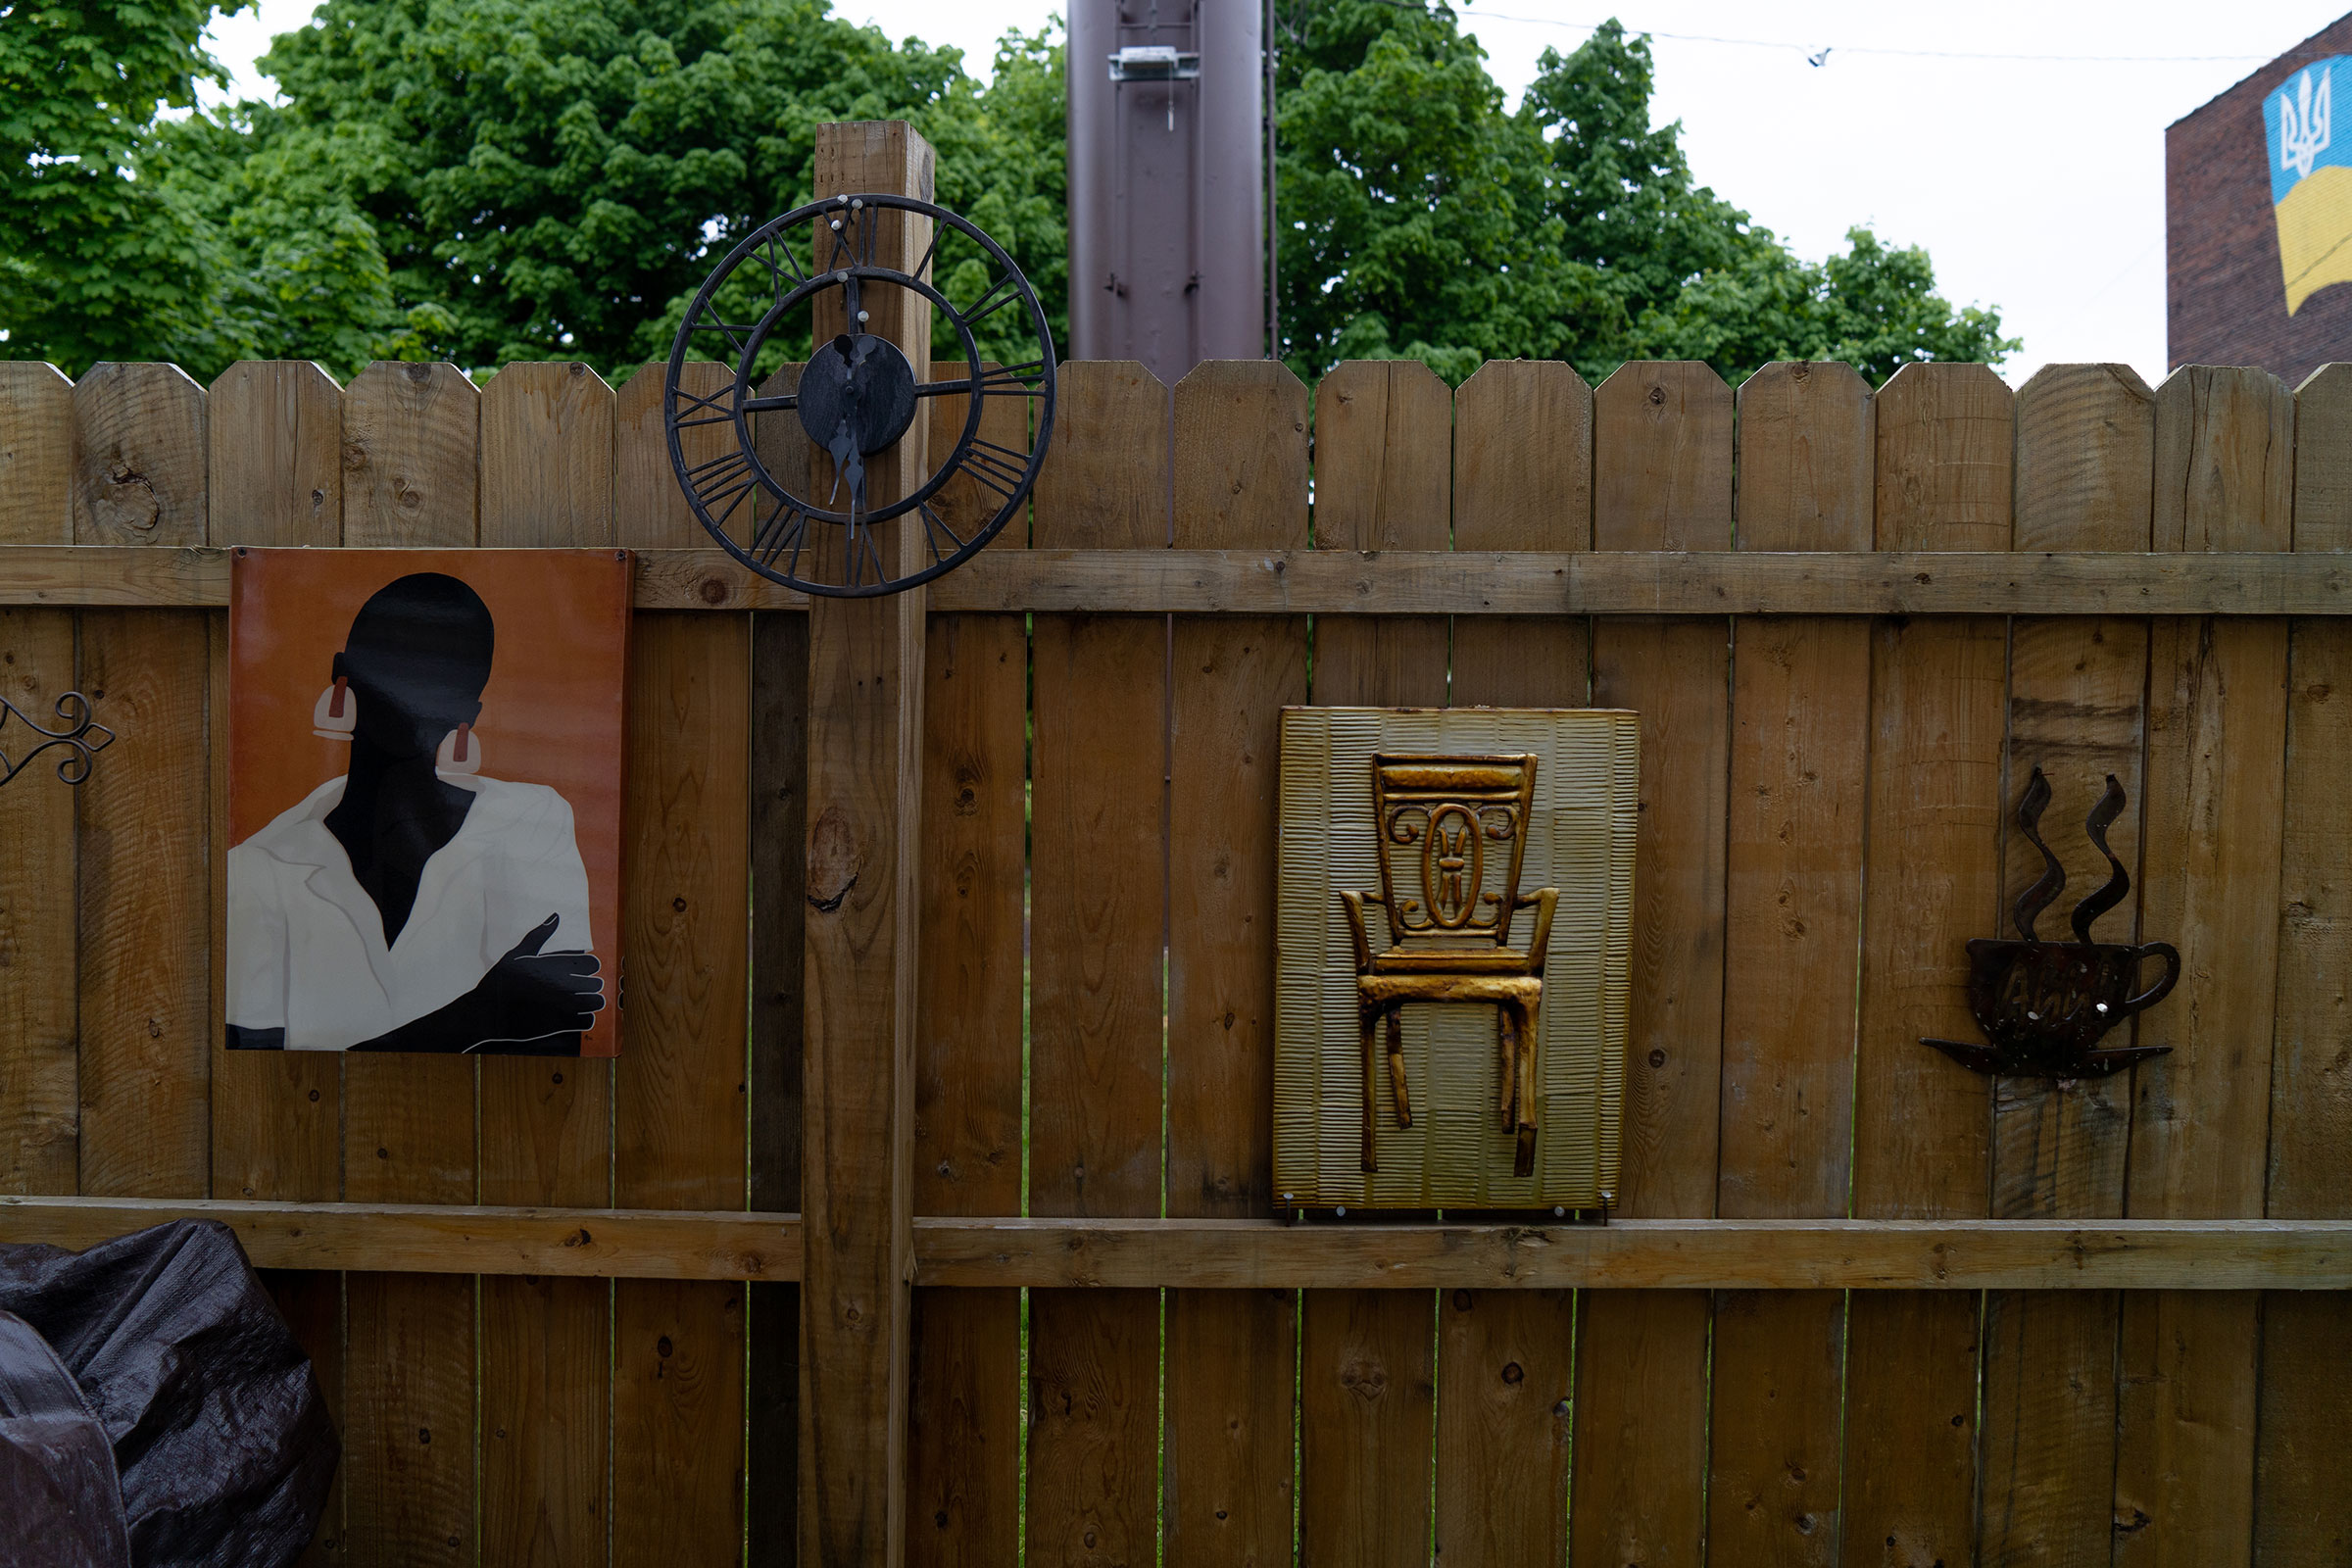 Farmhouse decorations on the fence of Katherine's home. (Joshua Thermidor for TIME)